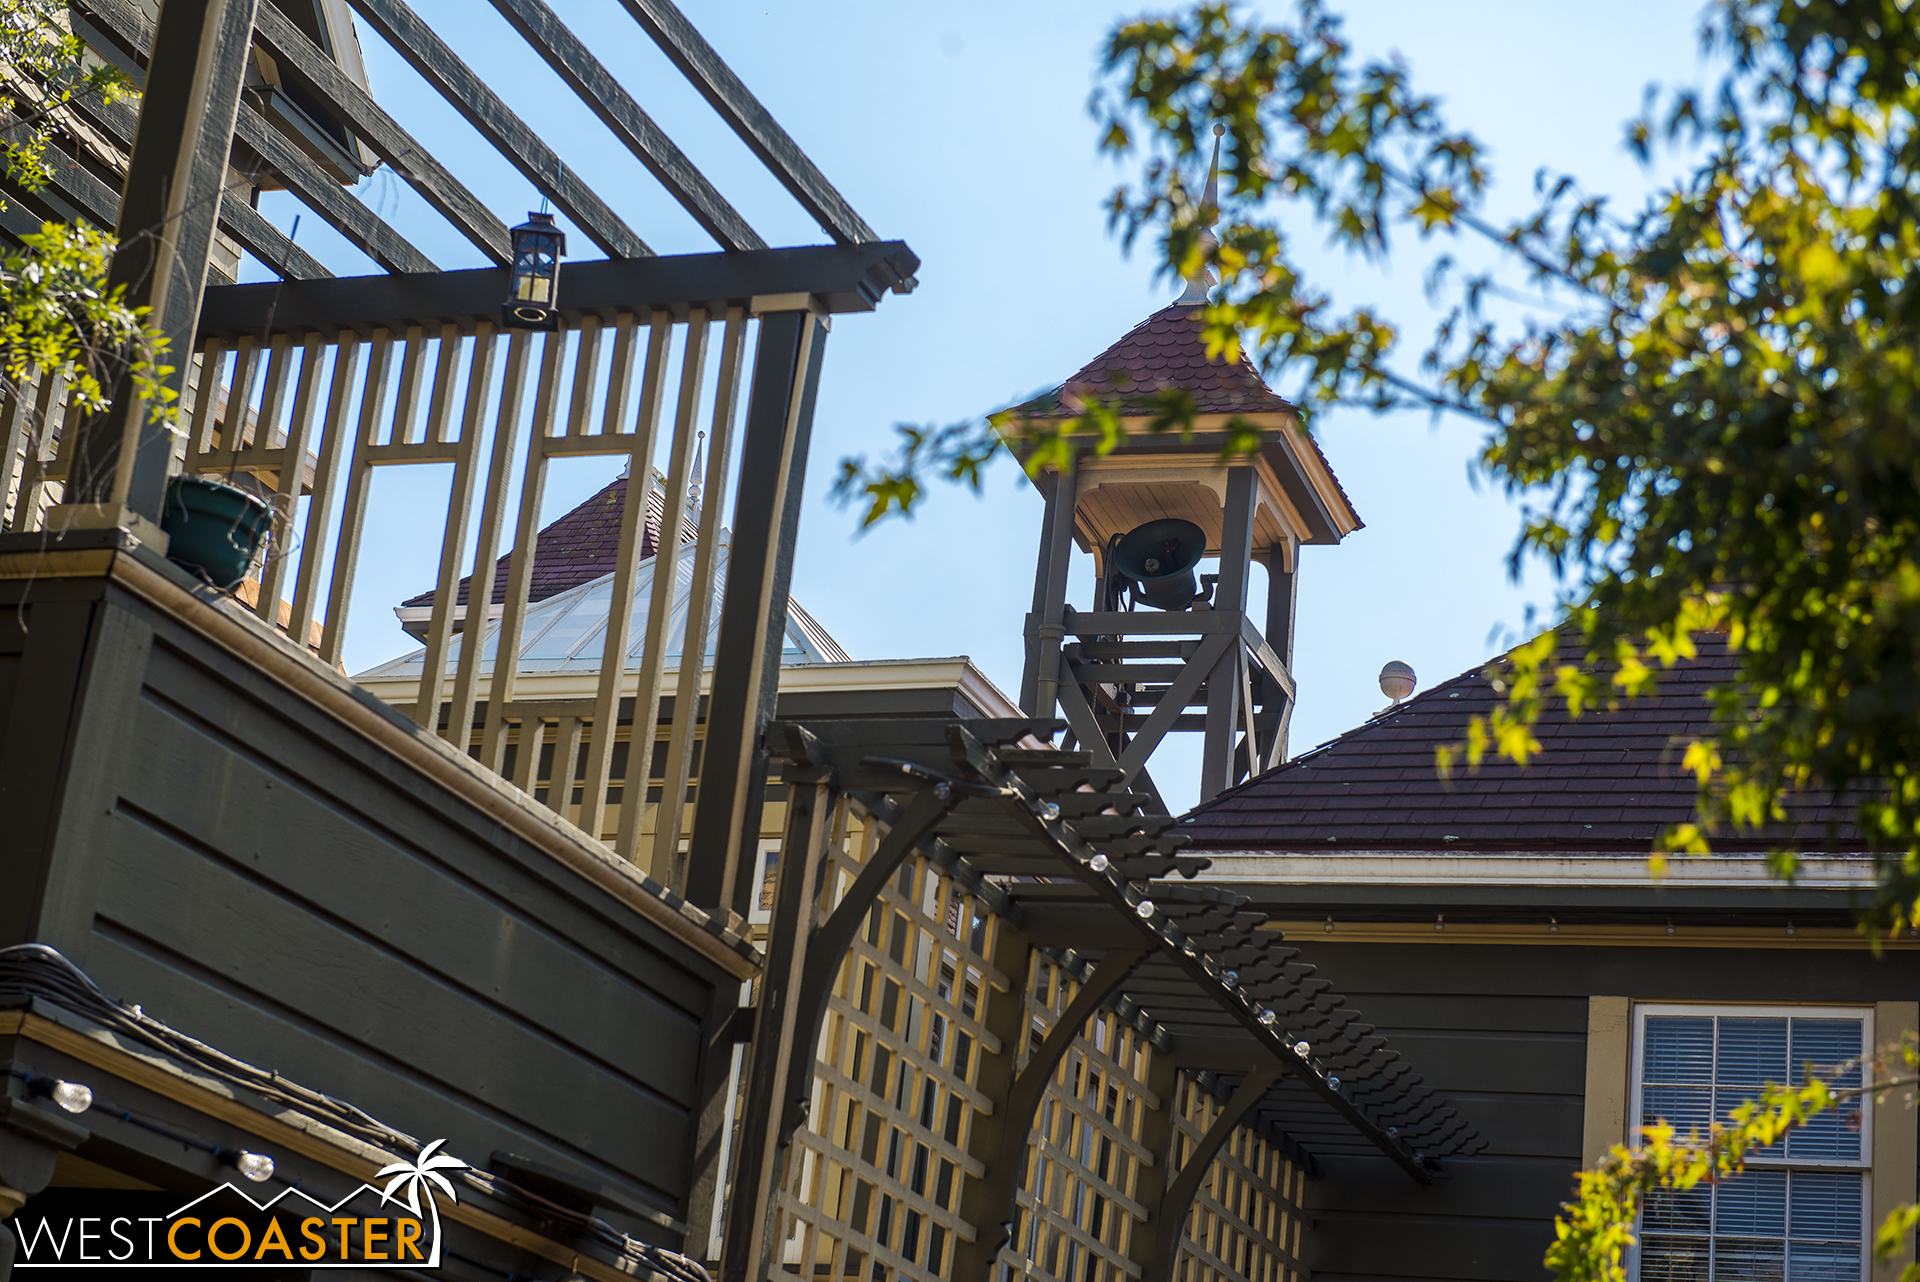  This past Friday the 13th, Winchester Mystery House celebrated a tradition done only on Friday the 13th's... the ringing of the bell tower 13 times at 13:00. 